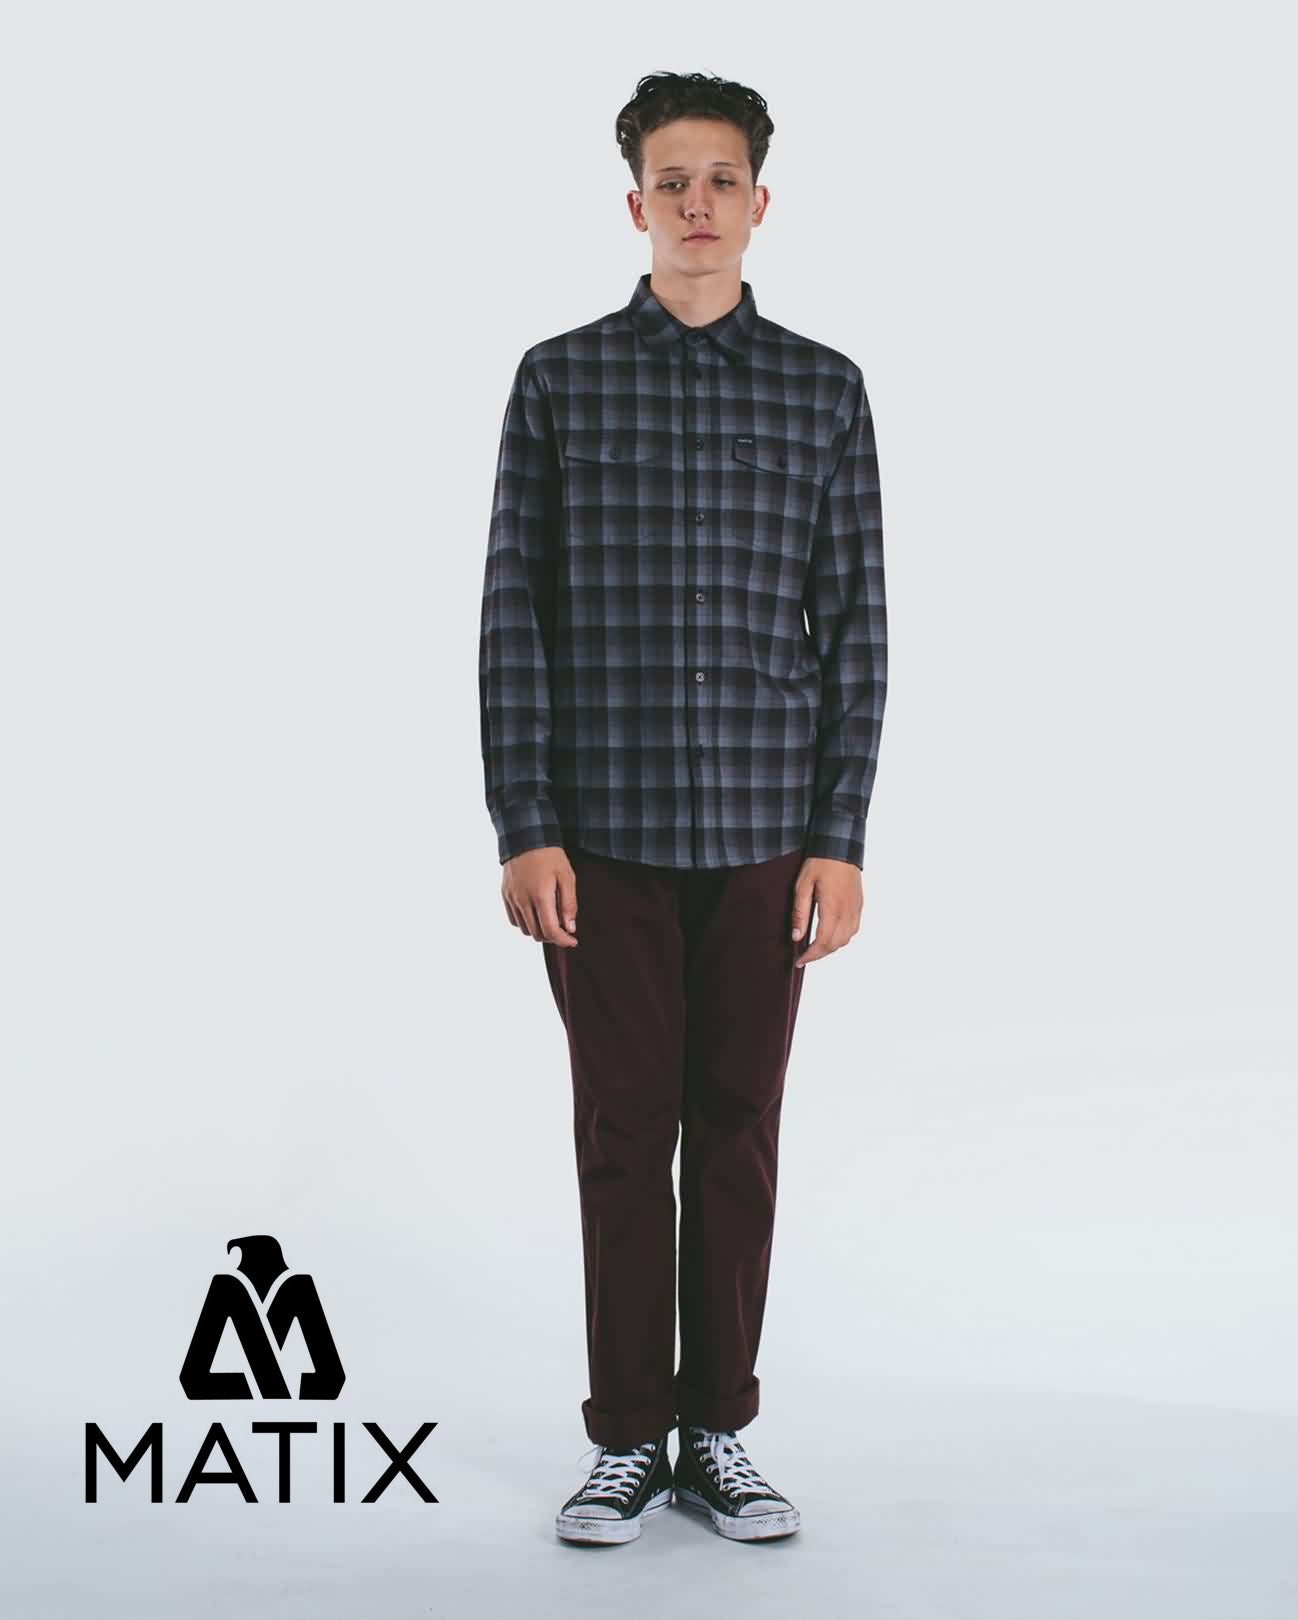 Matix Fall 2016 Mens Lifestyle Apparel Clothing Collection